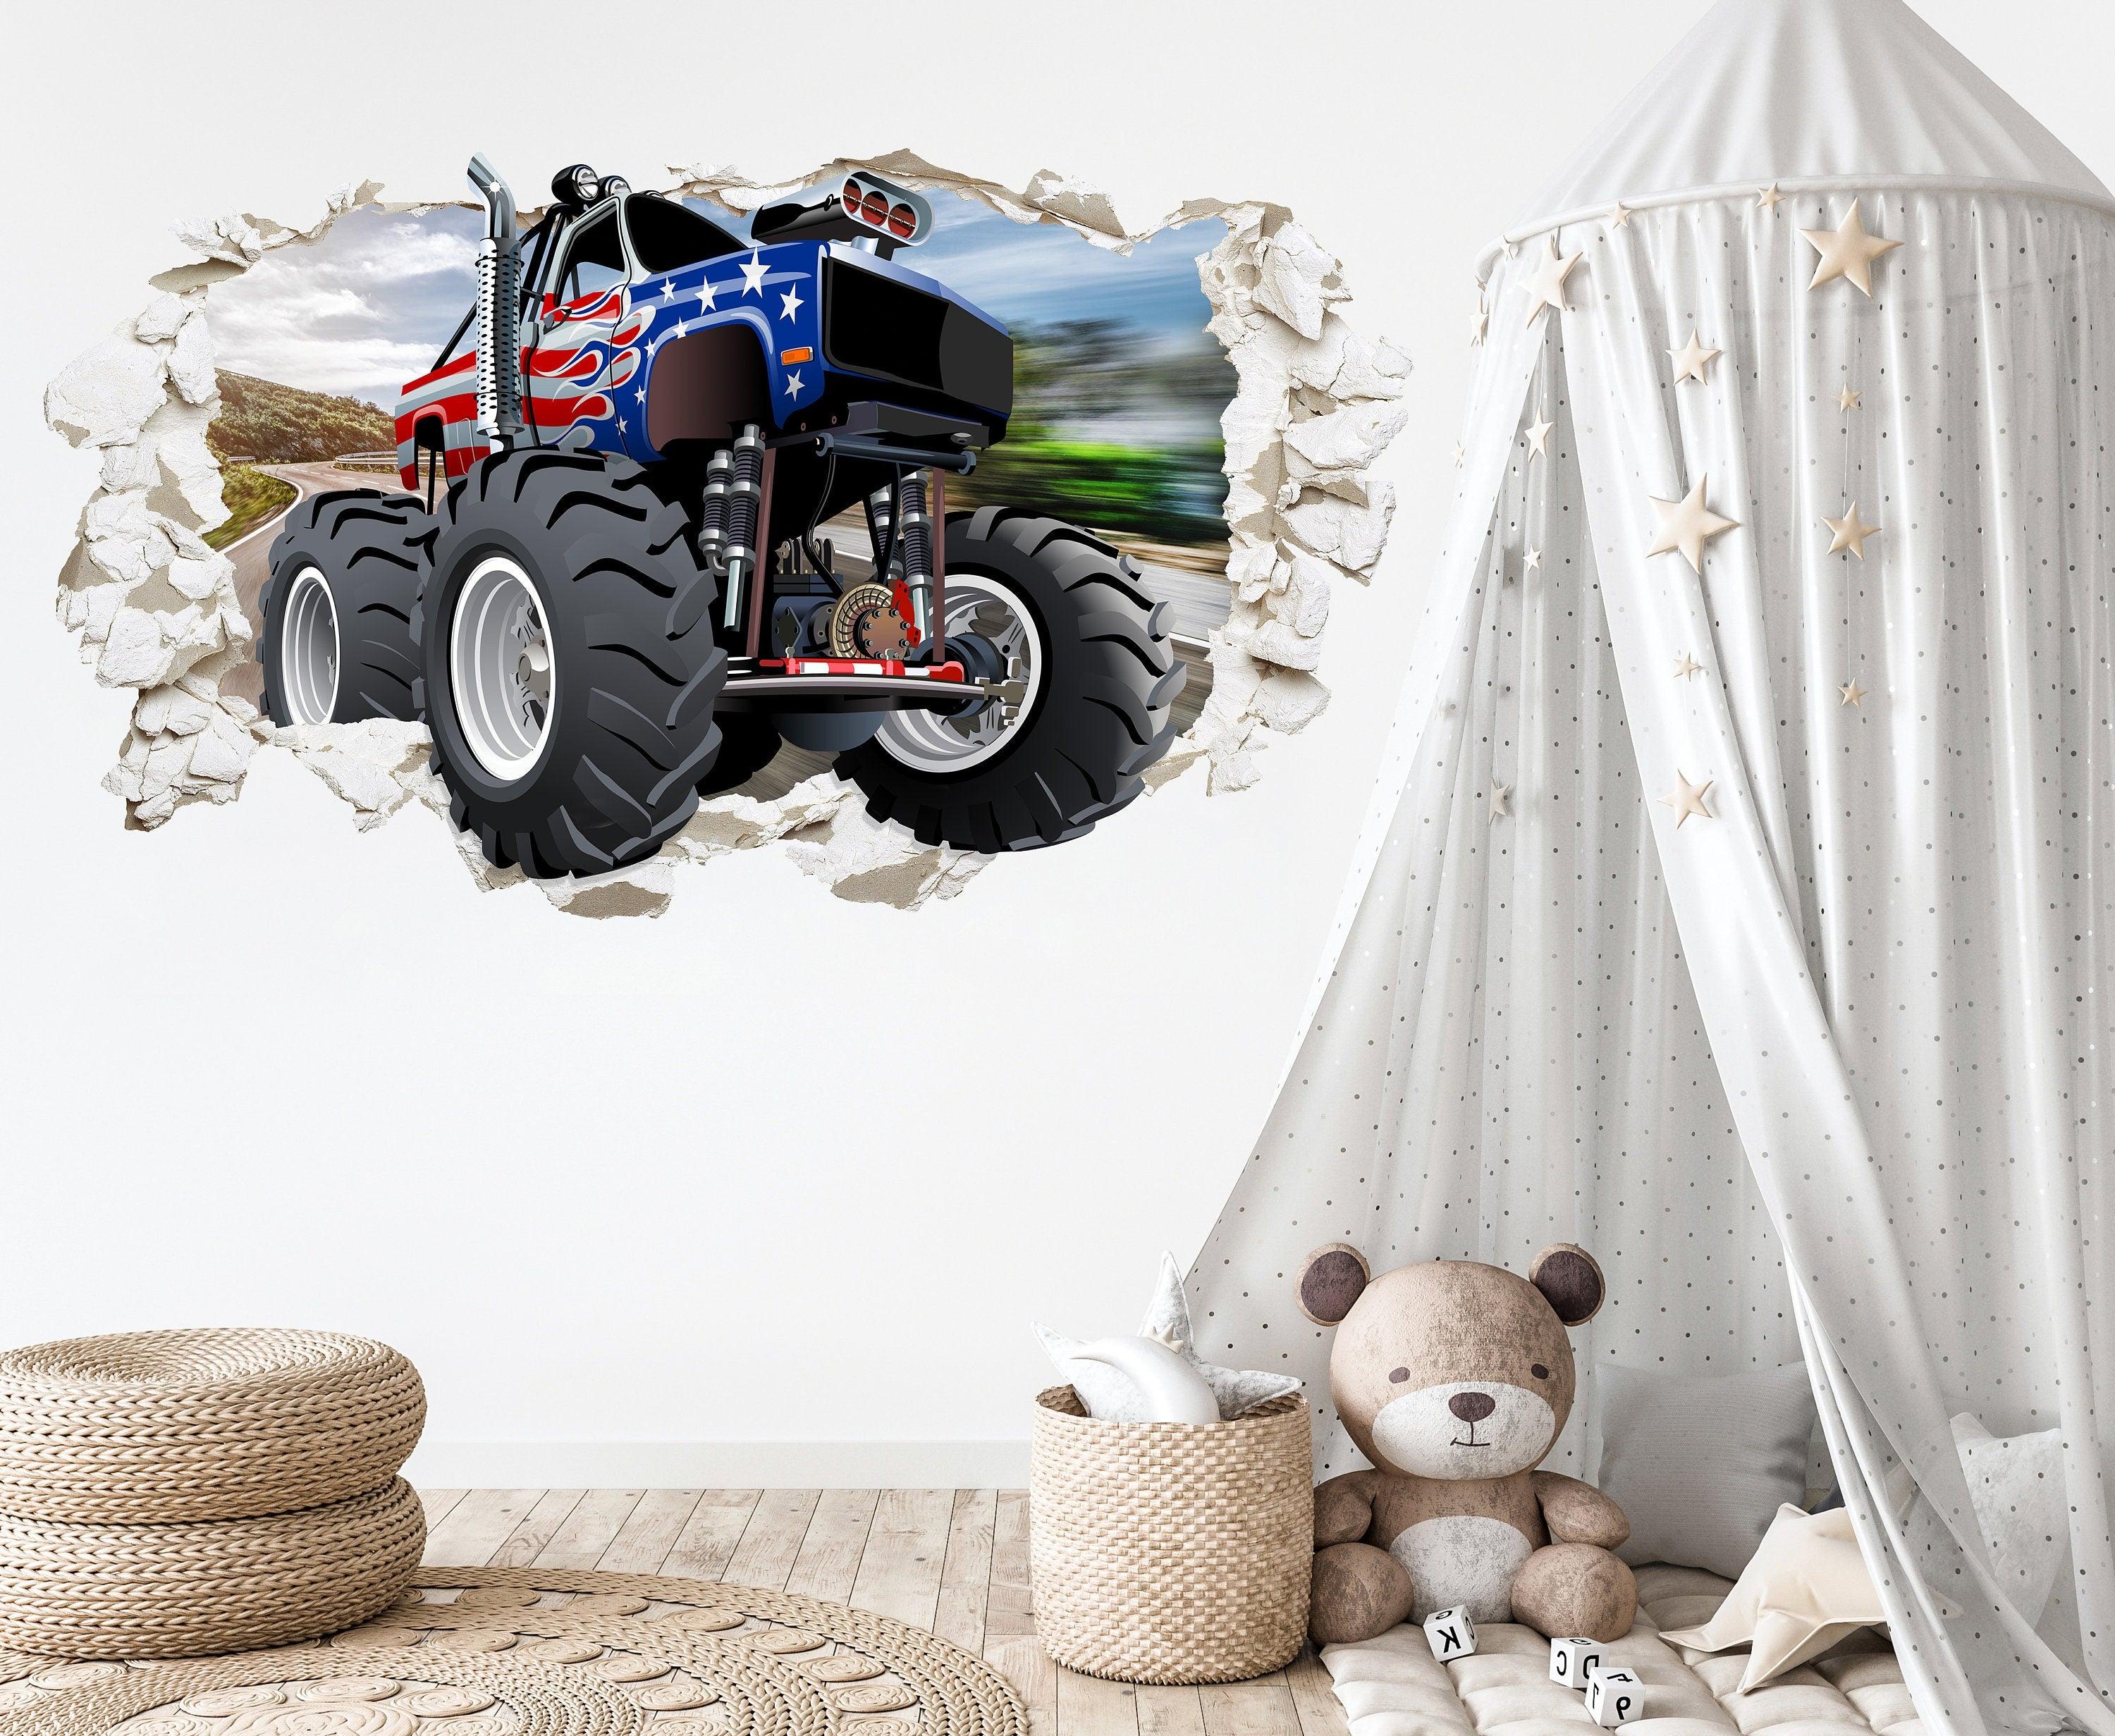 Monster Truck 3D Plaster Wall Hole with American flag, Wall Decal Sticker, Removable 002